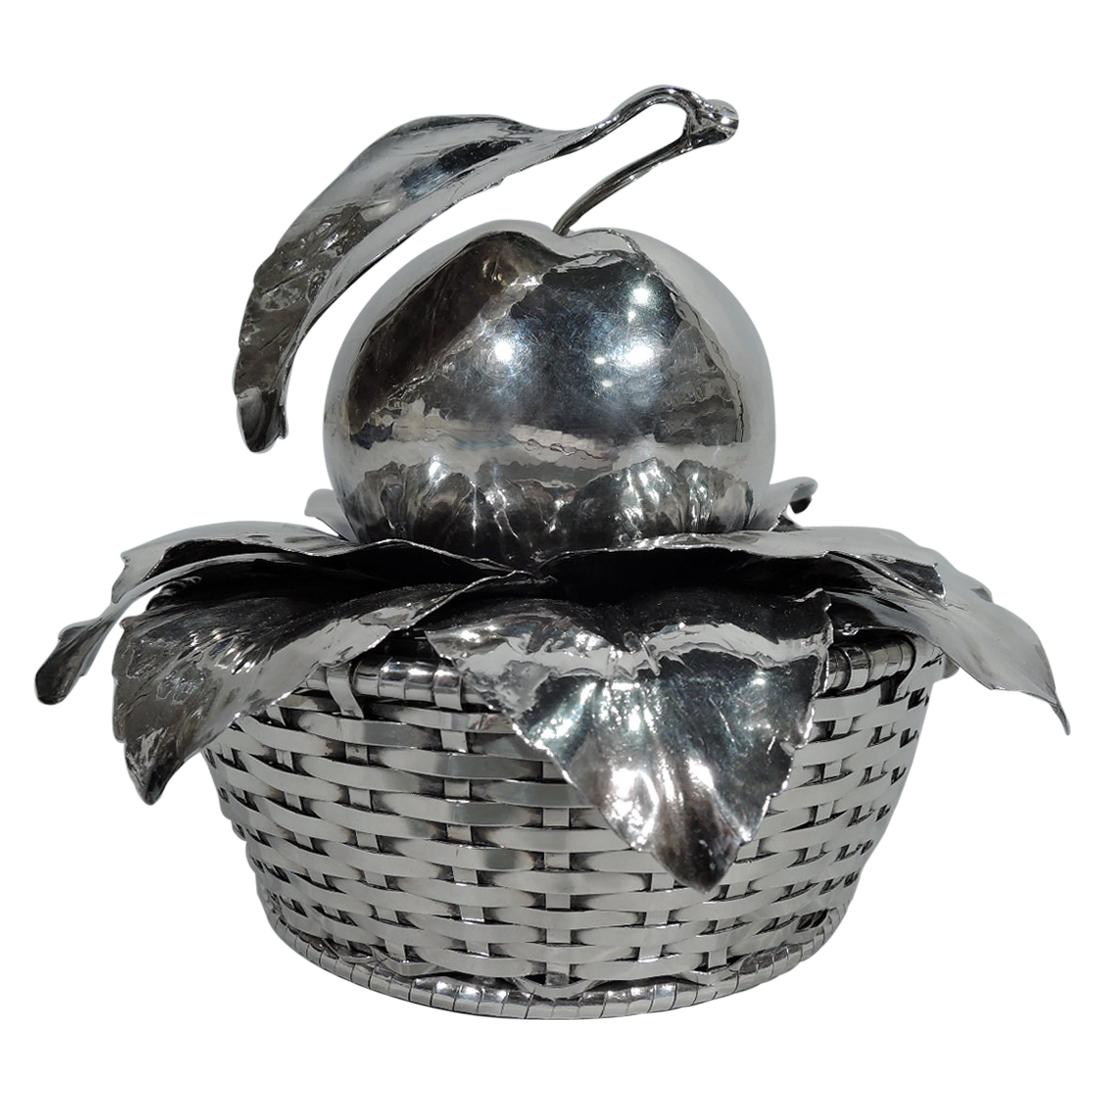 Charming Buccellati Sterling Silver Fruit Basket with Apple Finial